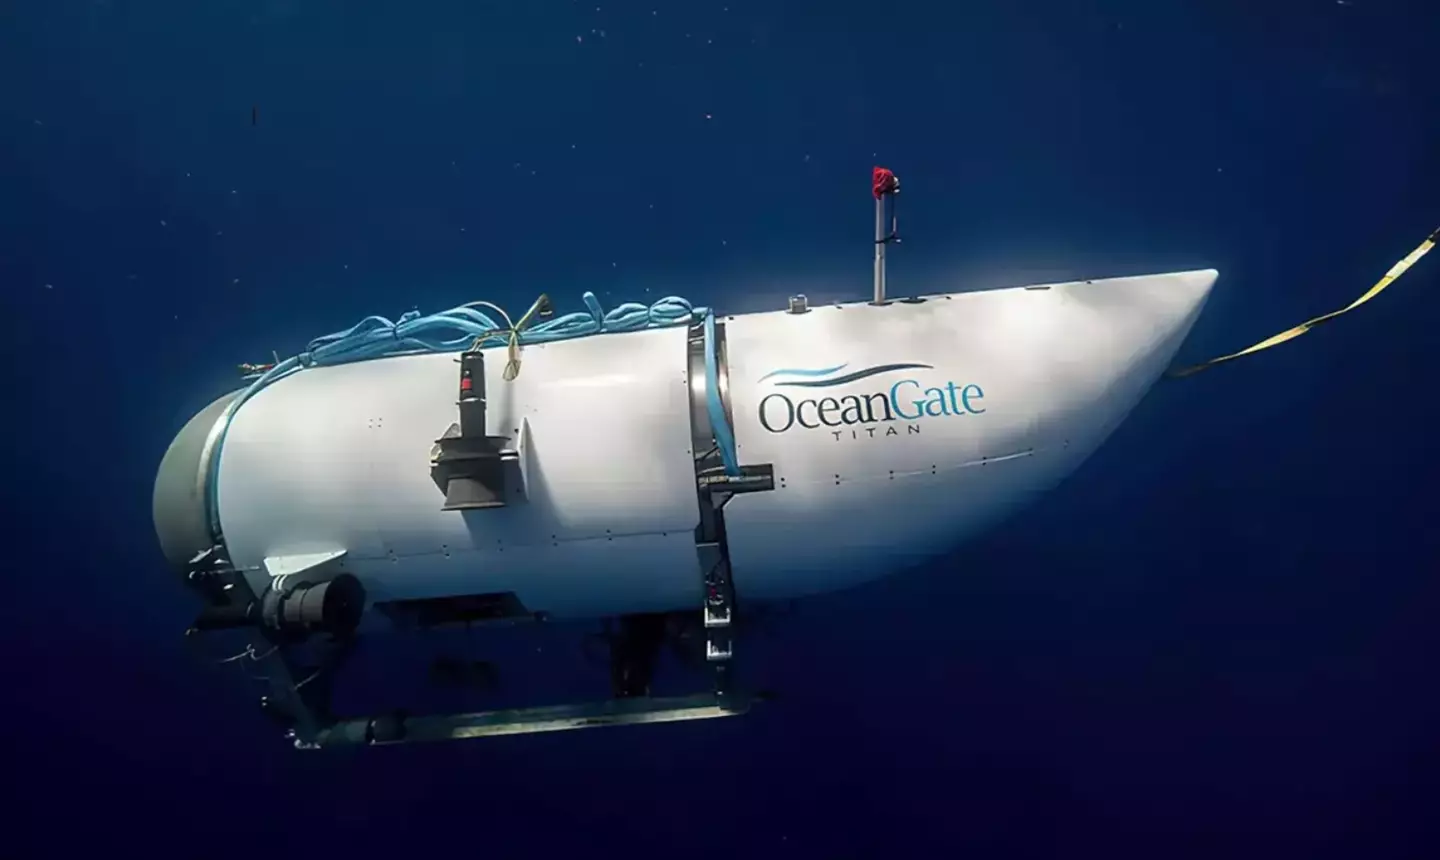 Many concerns were raised about the Titan submersible.